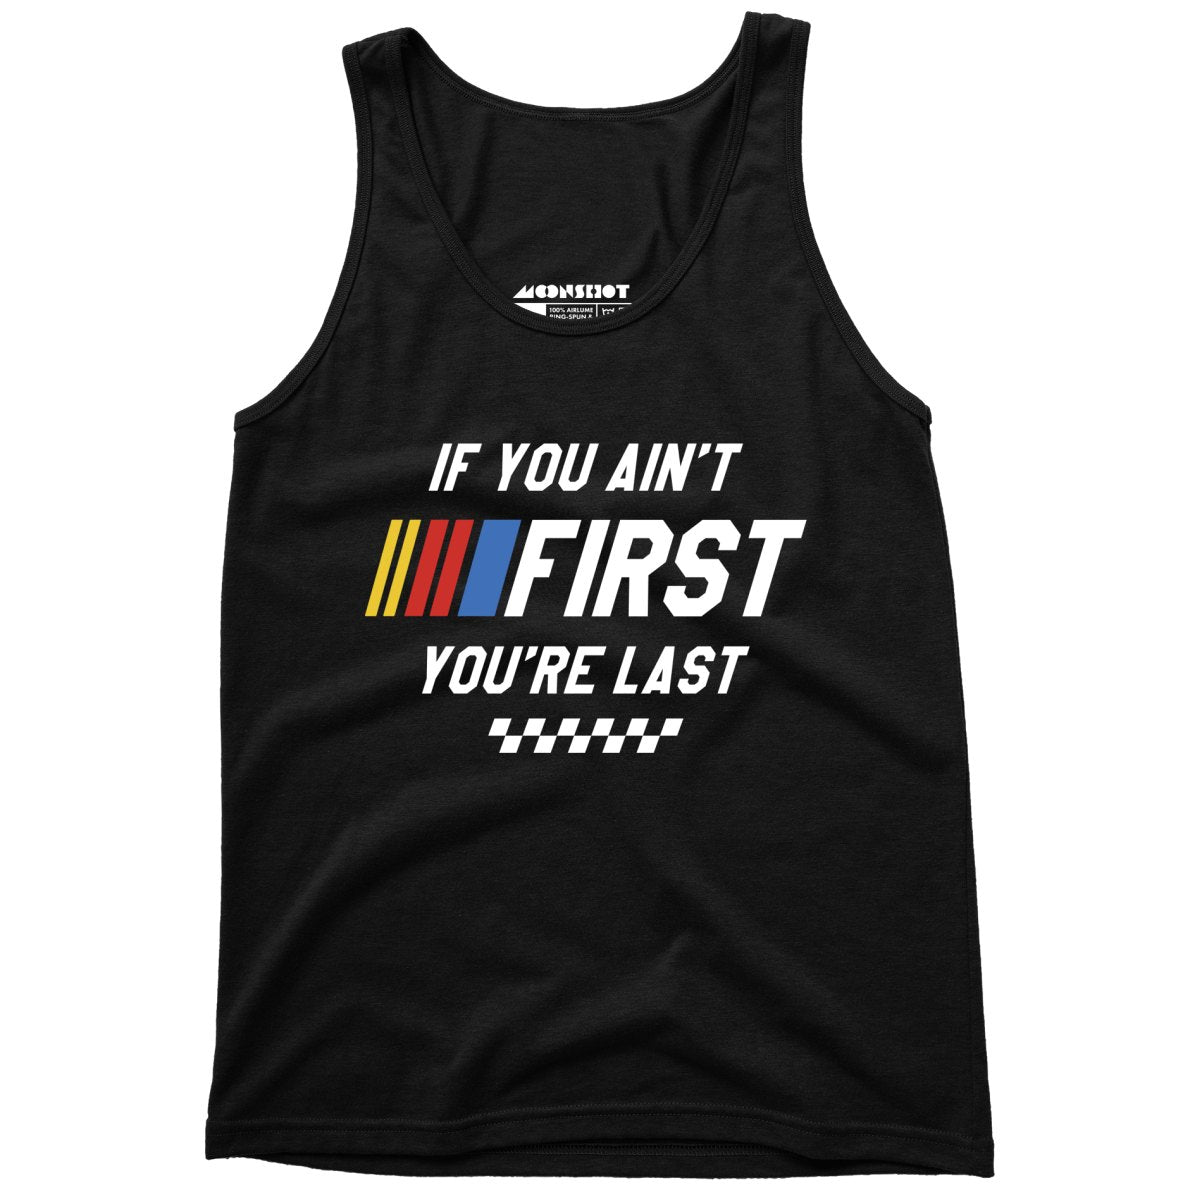 If You Ain't First You're Last - Talladega Nights - Unisex Tank Top